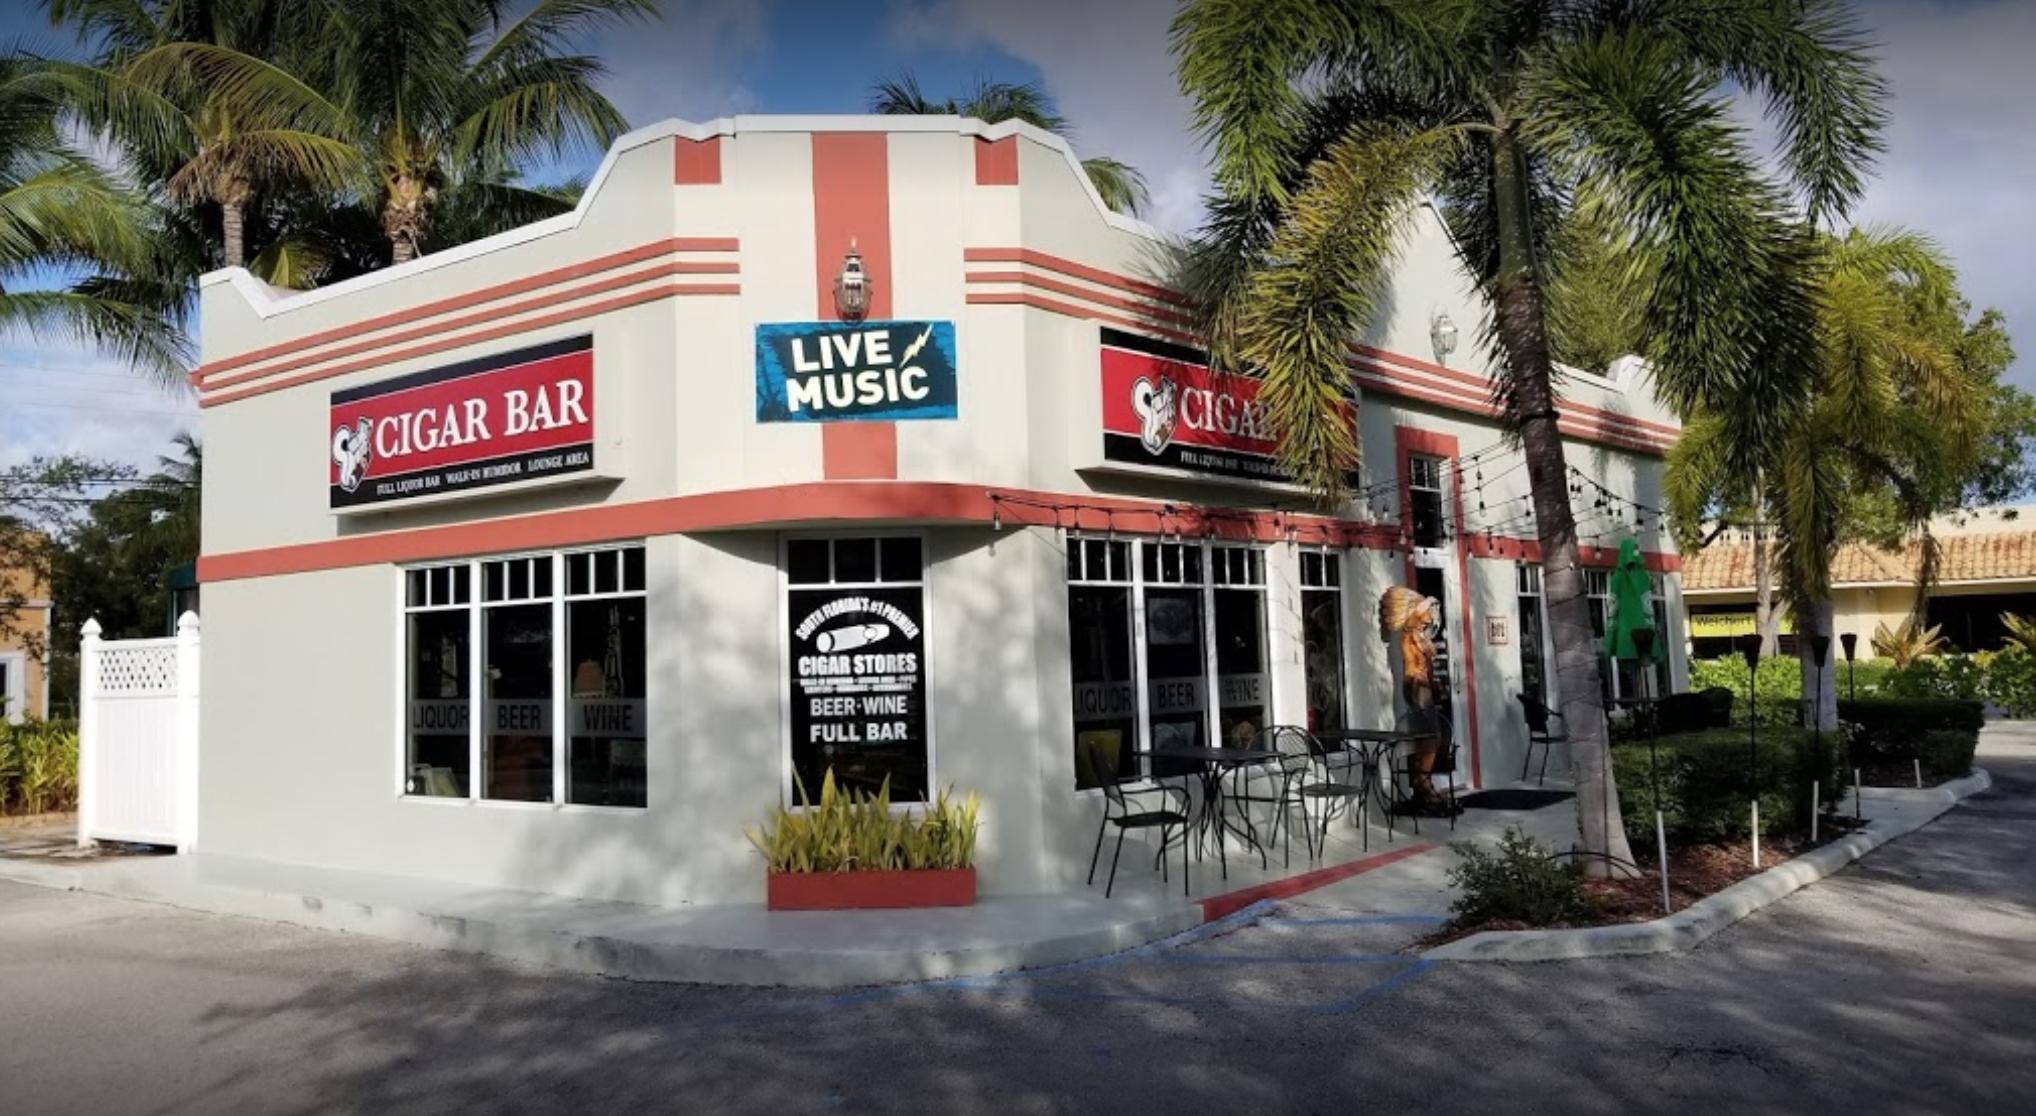 Great corner location in the heart of Downtown Delray Beach.